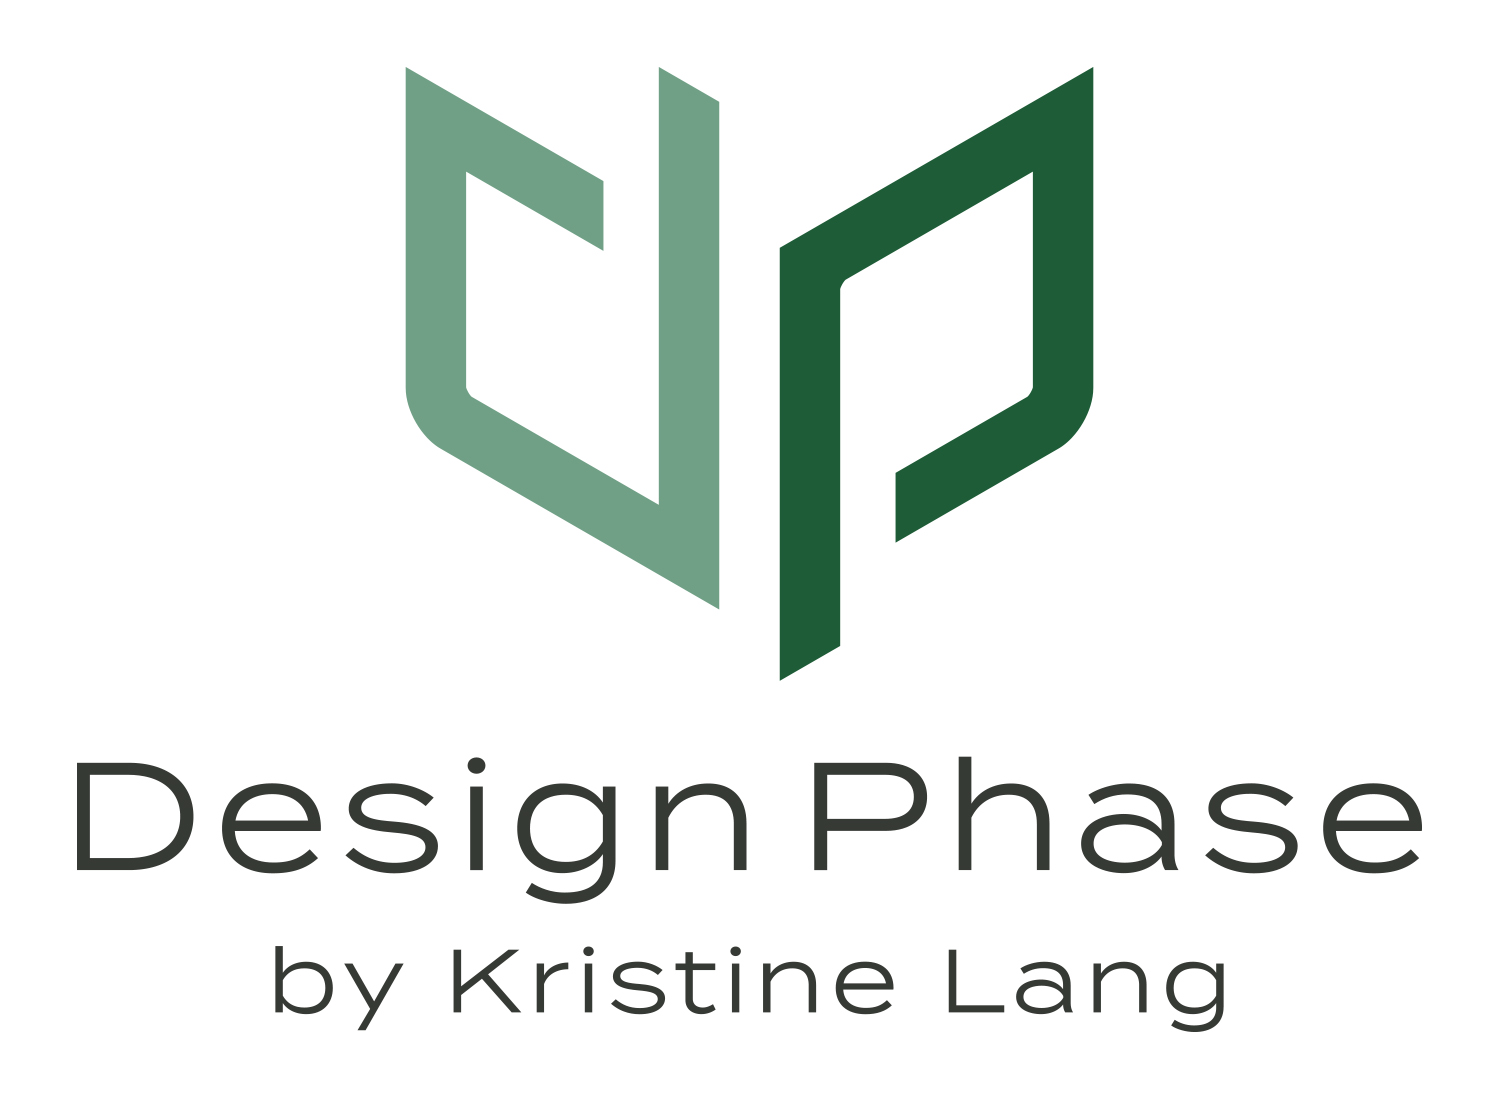 Design Phase by Kristine Lang 